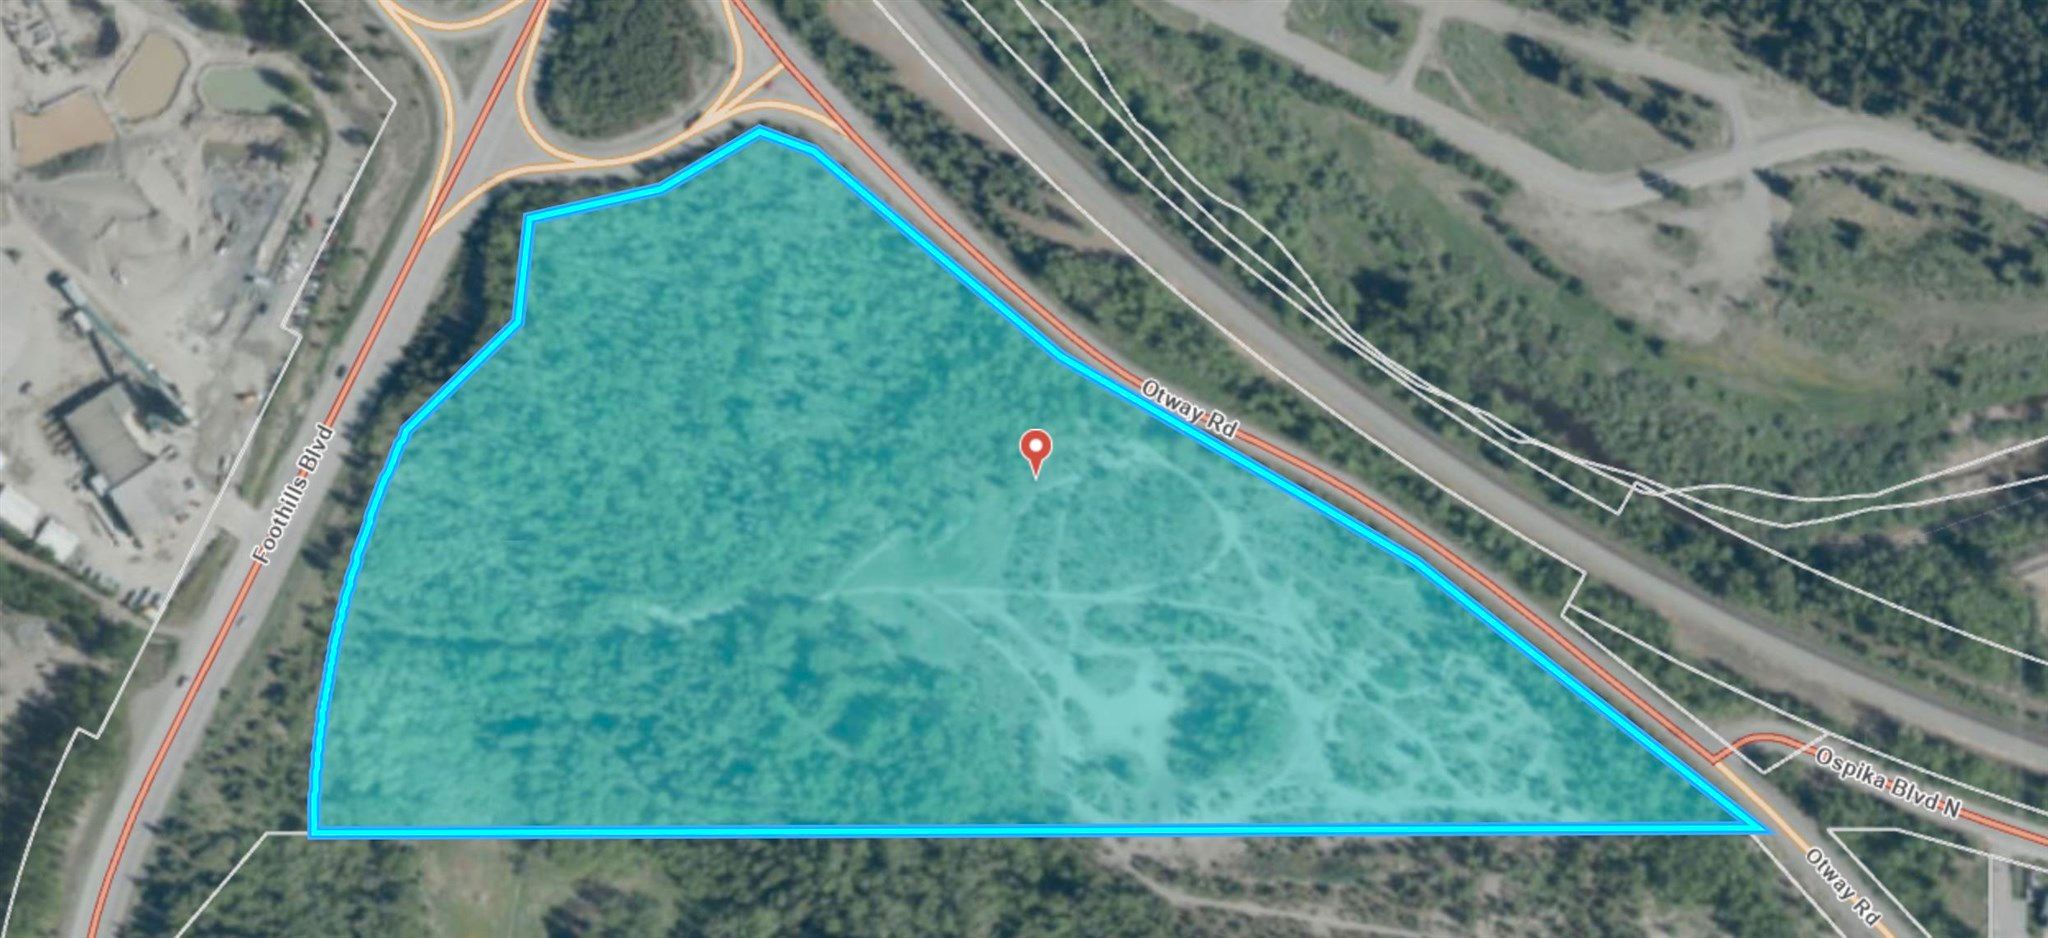 Main Photo: LOT 1 OTWAY Road in Prince George: Cranbrook Hill Land for sale (PG City West)  : MLS®# R2605330